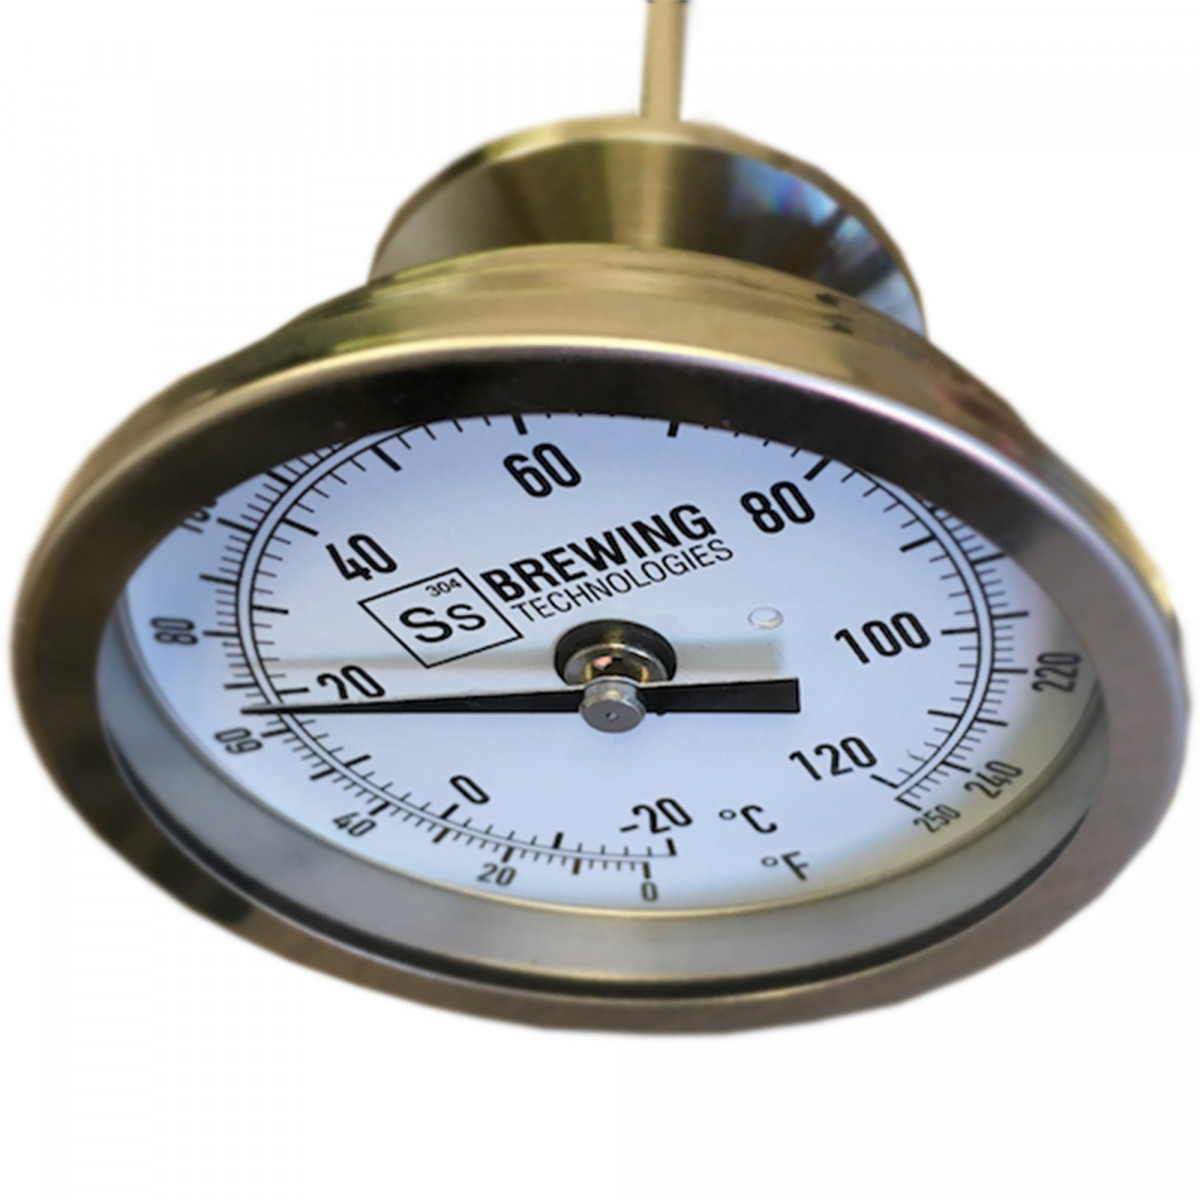 Ss Brewtech™ Thermometer (with Ss logo) for TC Kettles (TC Brew Kettle, BME Kettle, eKettle)